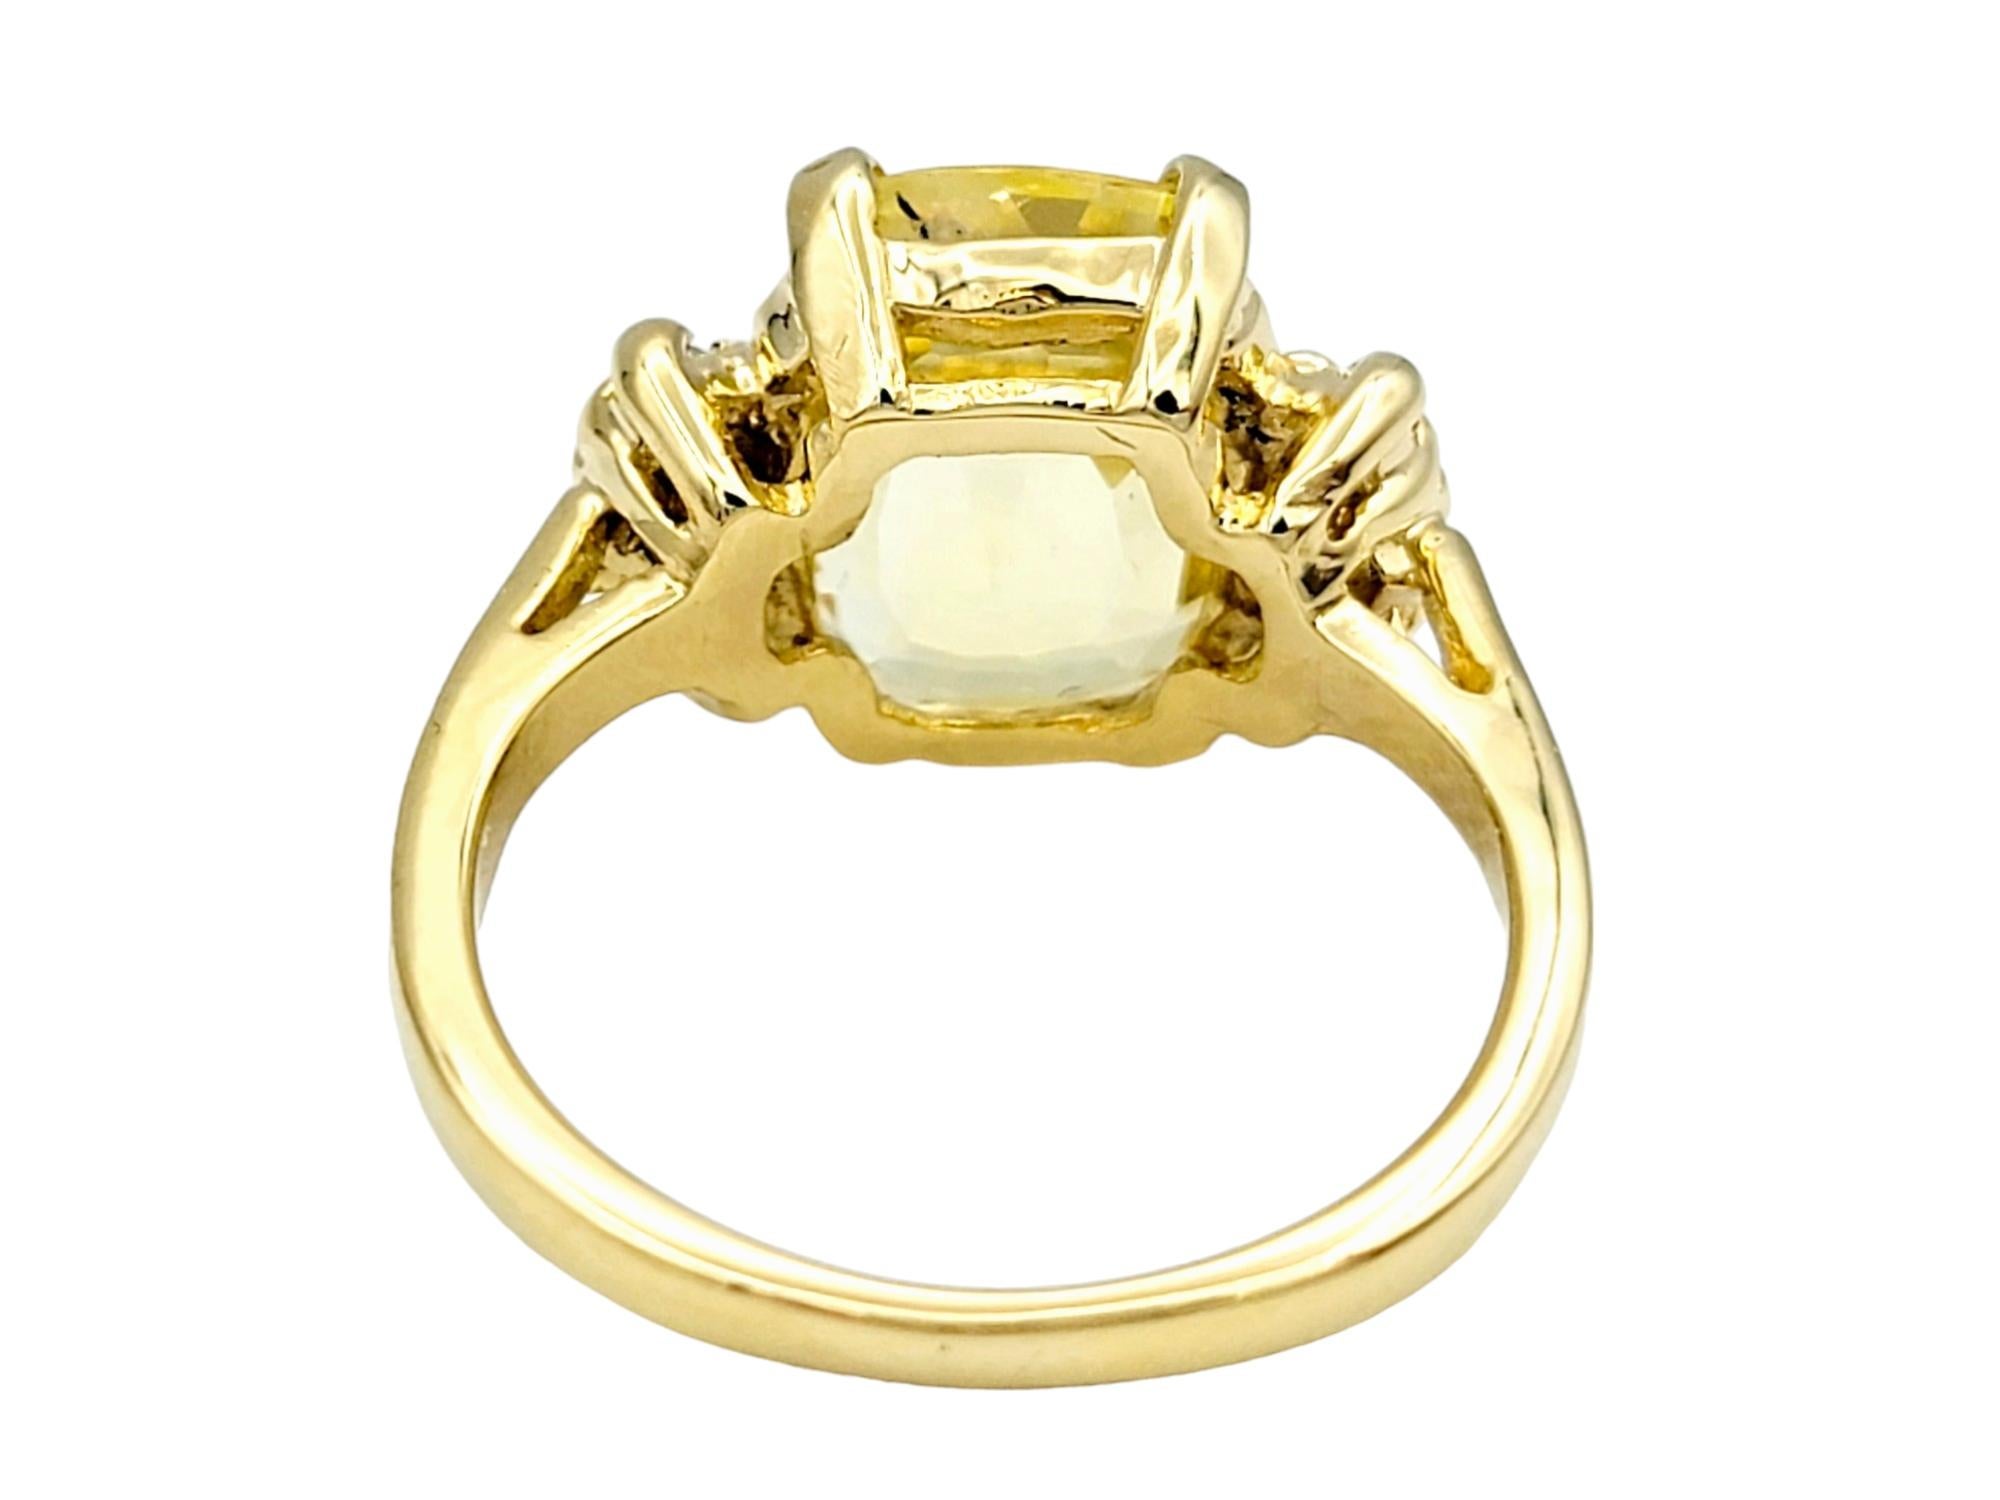 Cushion Cut Yellow Sapphire and Diamond Cocktail Ring in 14 Karat Yellow Gold For Sale 3